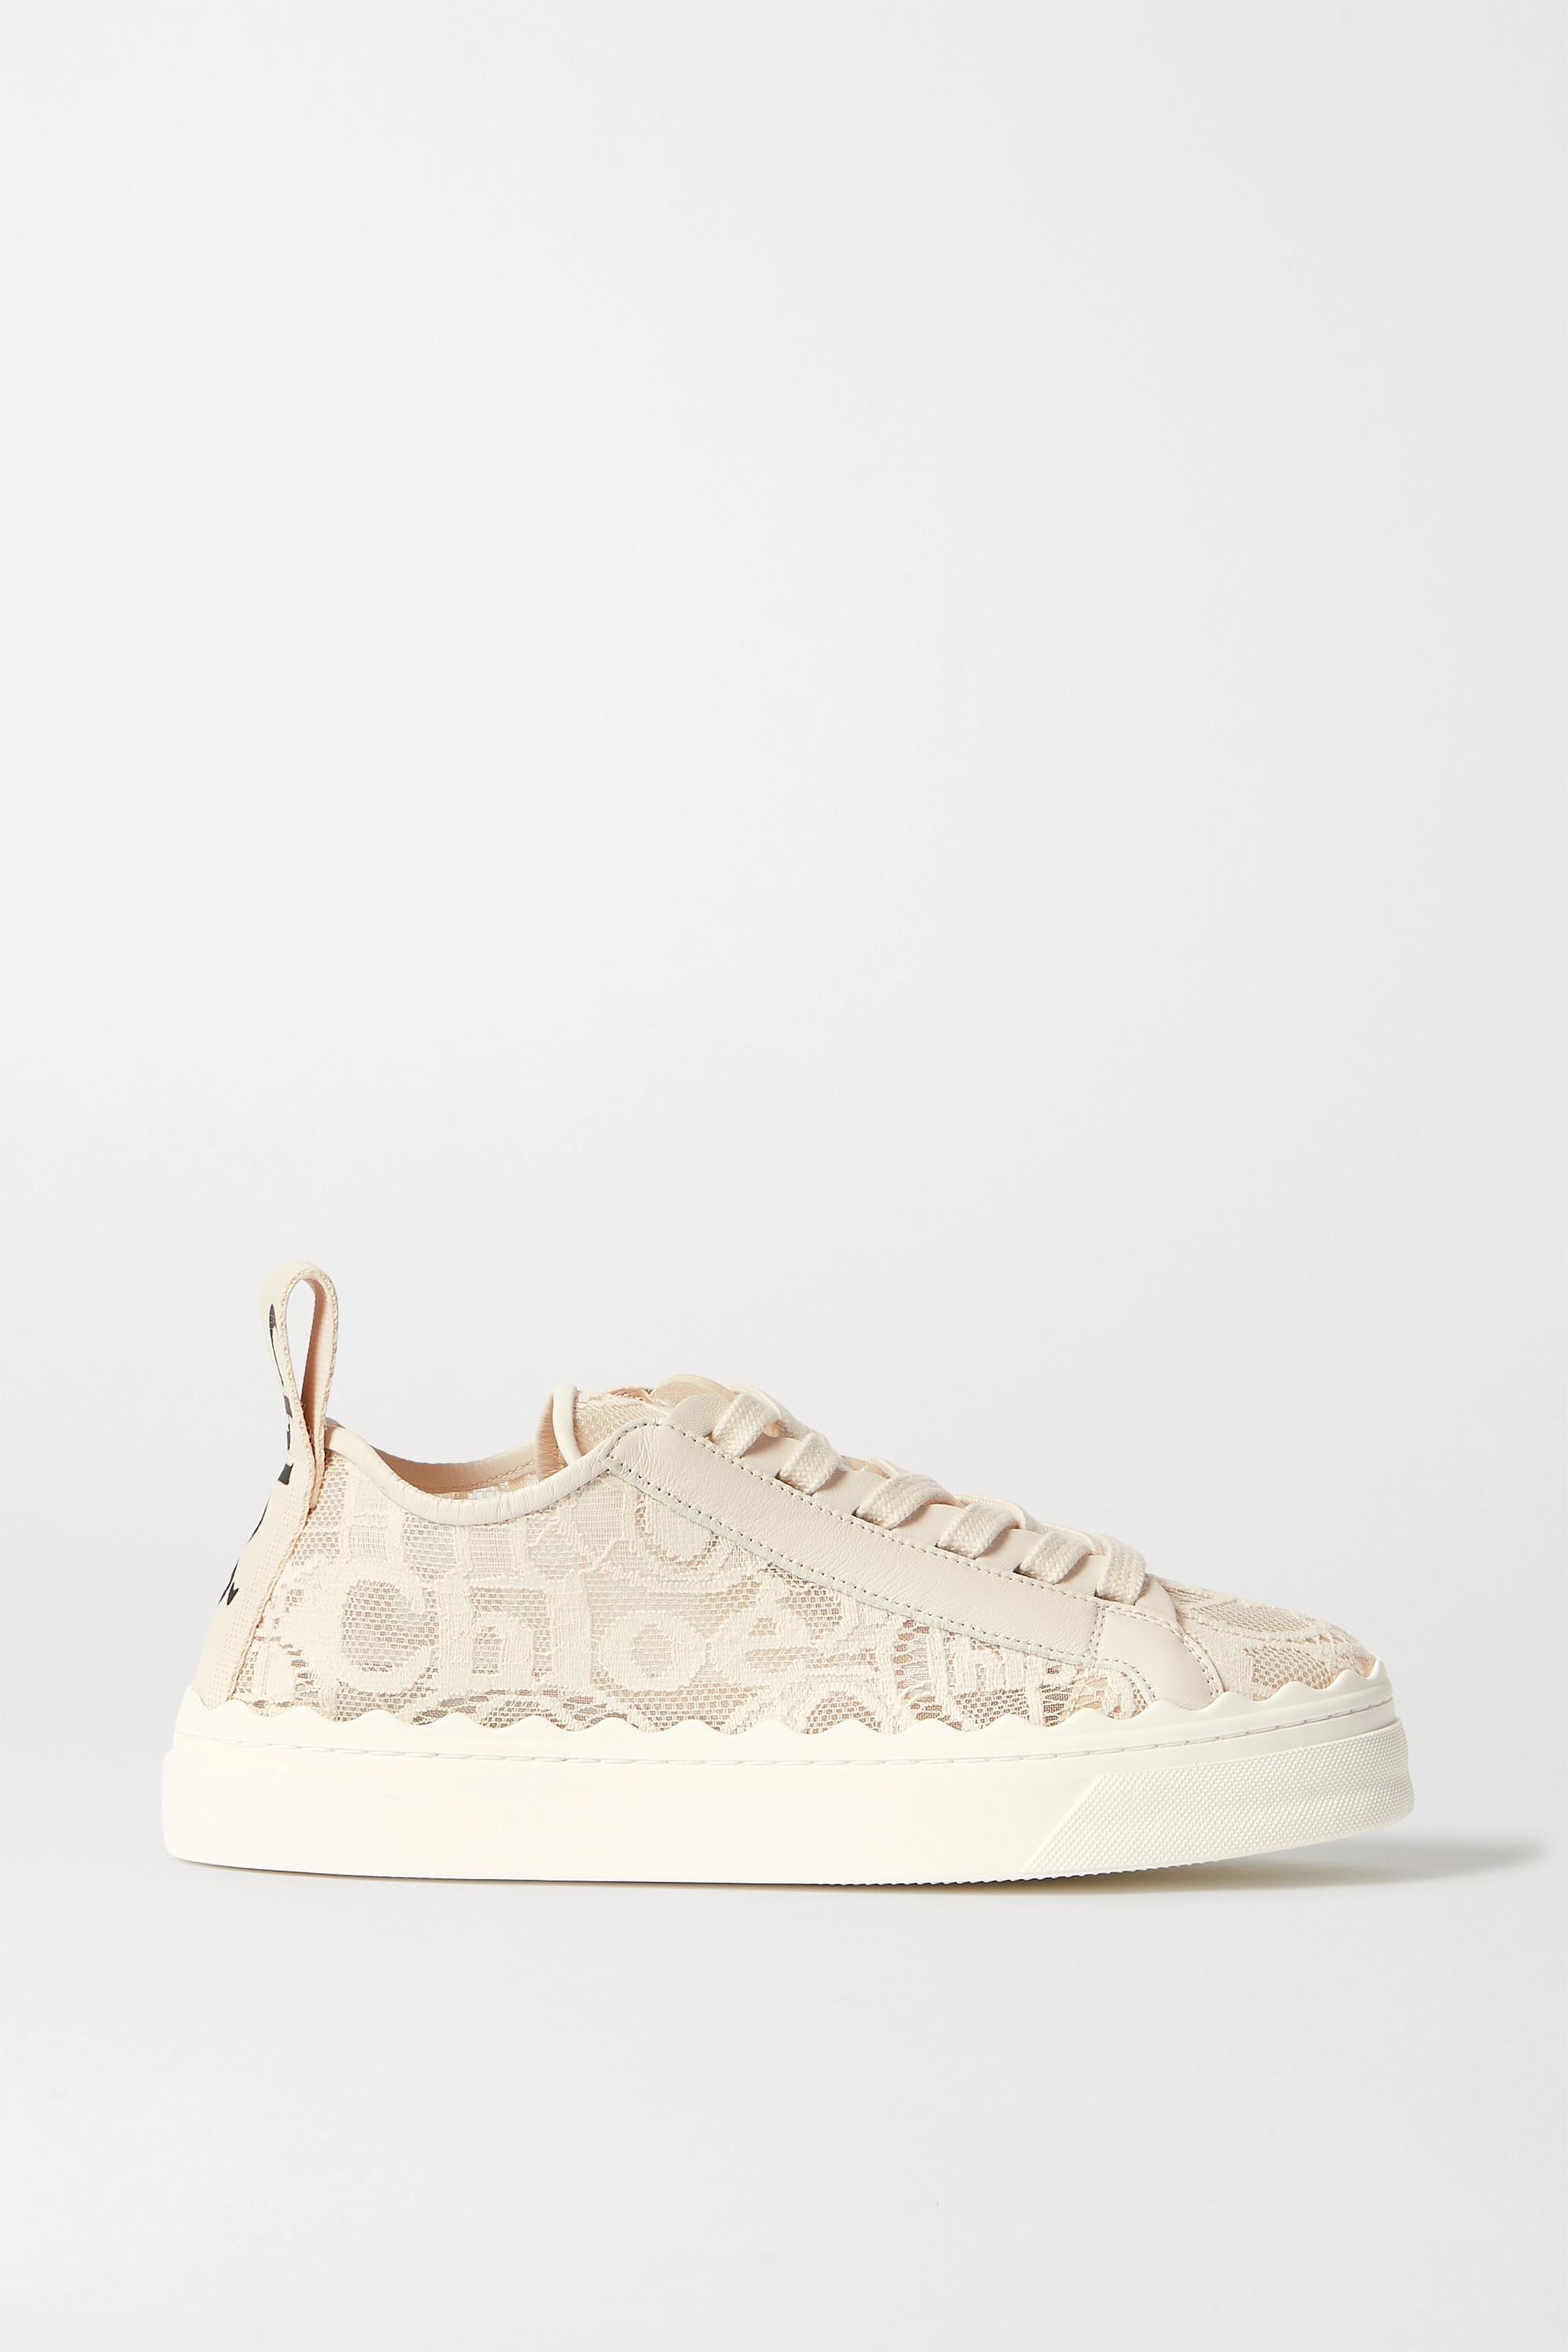 Chloé Lauren Scalloped Lace, Leather And Canvas Sneakers in White (Natural)  - Lyst